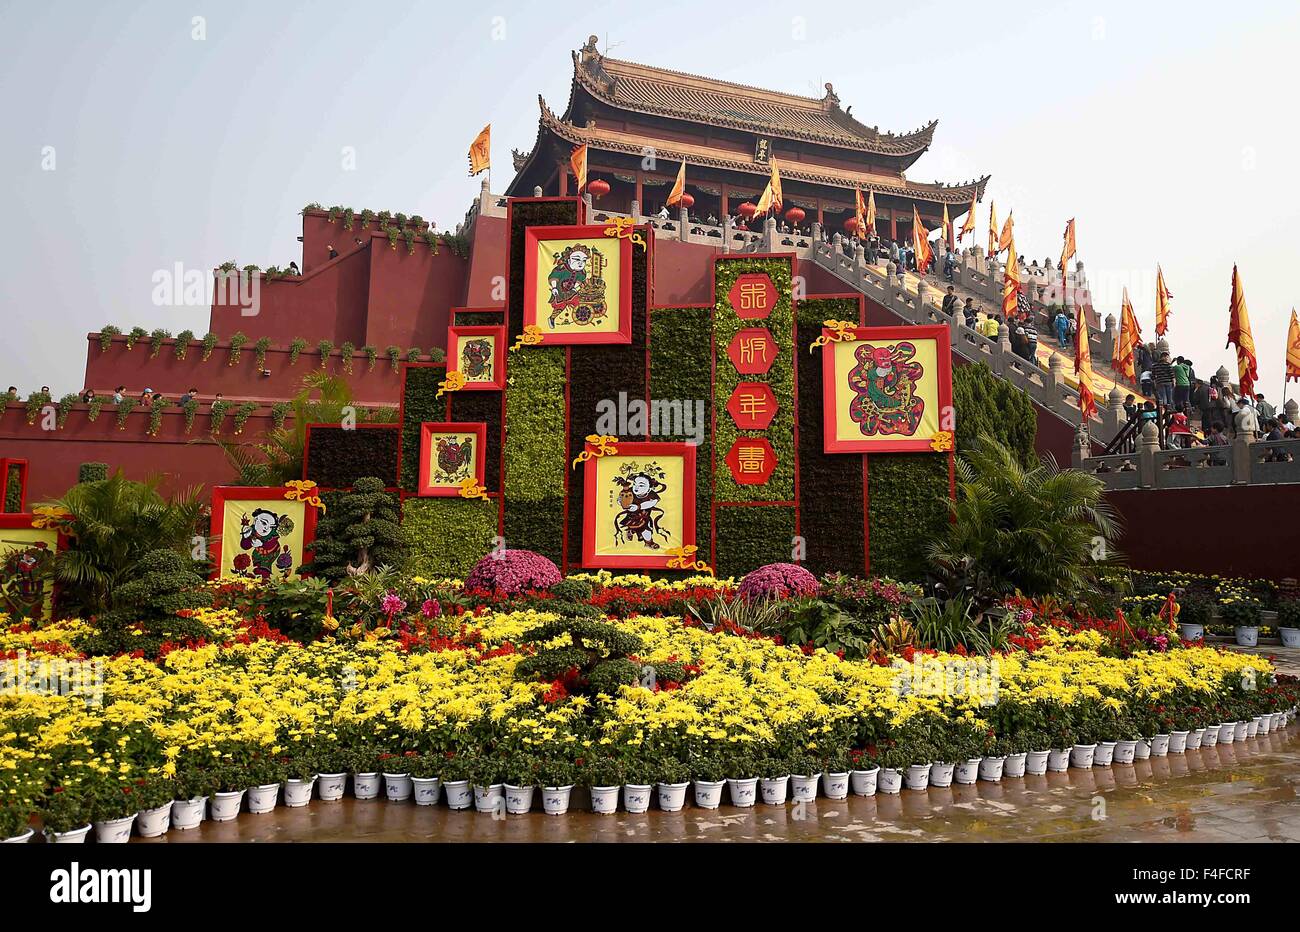 Kaifeng. 17th Oct, 2015. Photo taken on Oct. 17, 2015 shows chrysanthemums displayed in Kaifeng, central China's Henan Province. About 2.05 million pots of chrysanthemum in the city bursted into bloom recently. © Li An/Xinhua/Alamy Live News Stock Photo